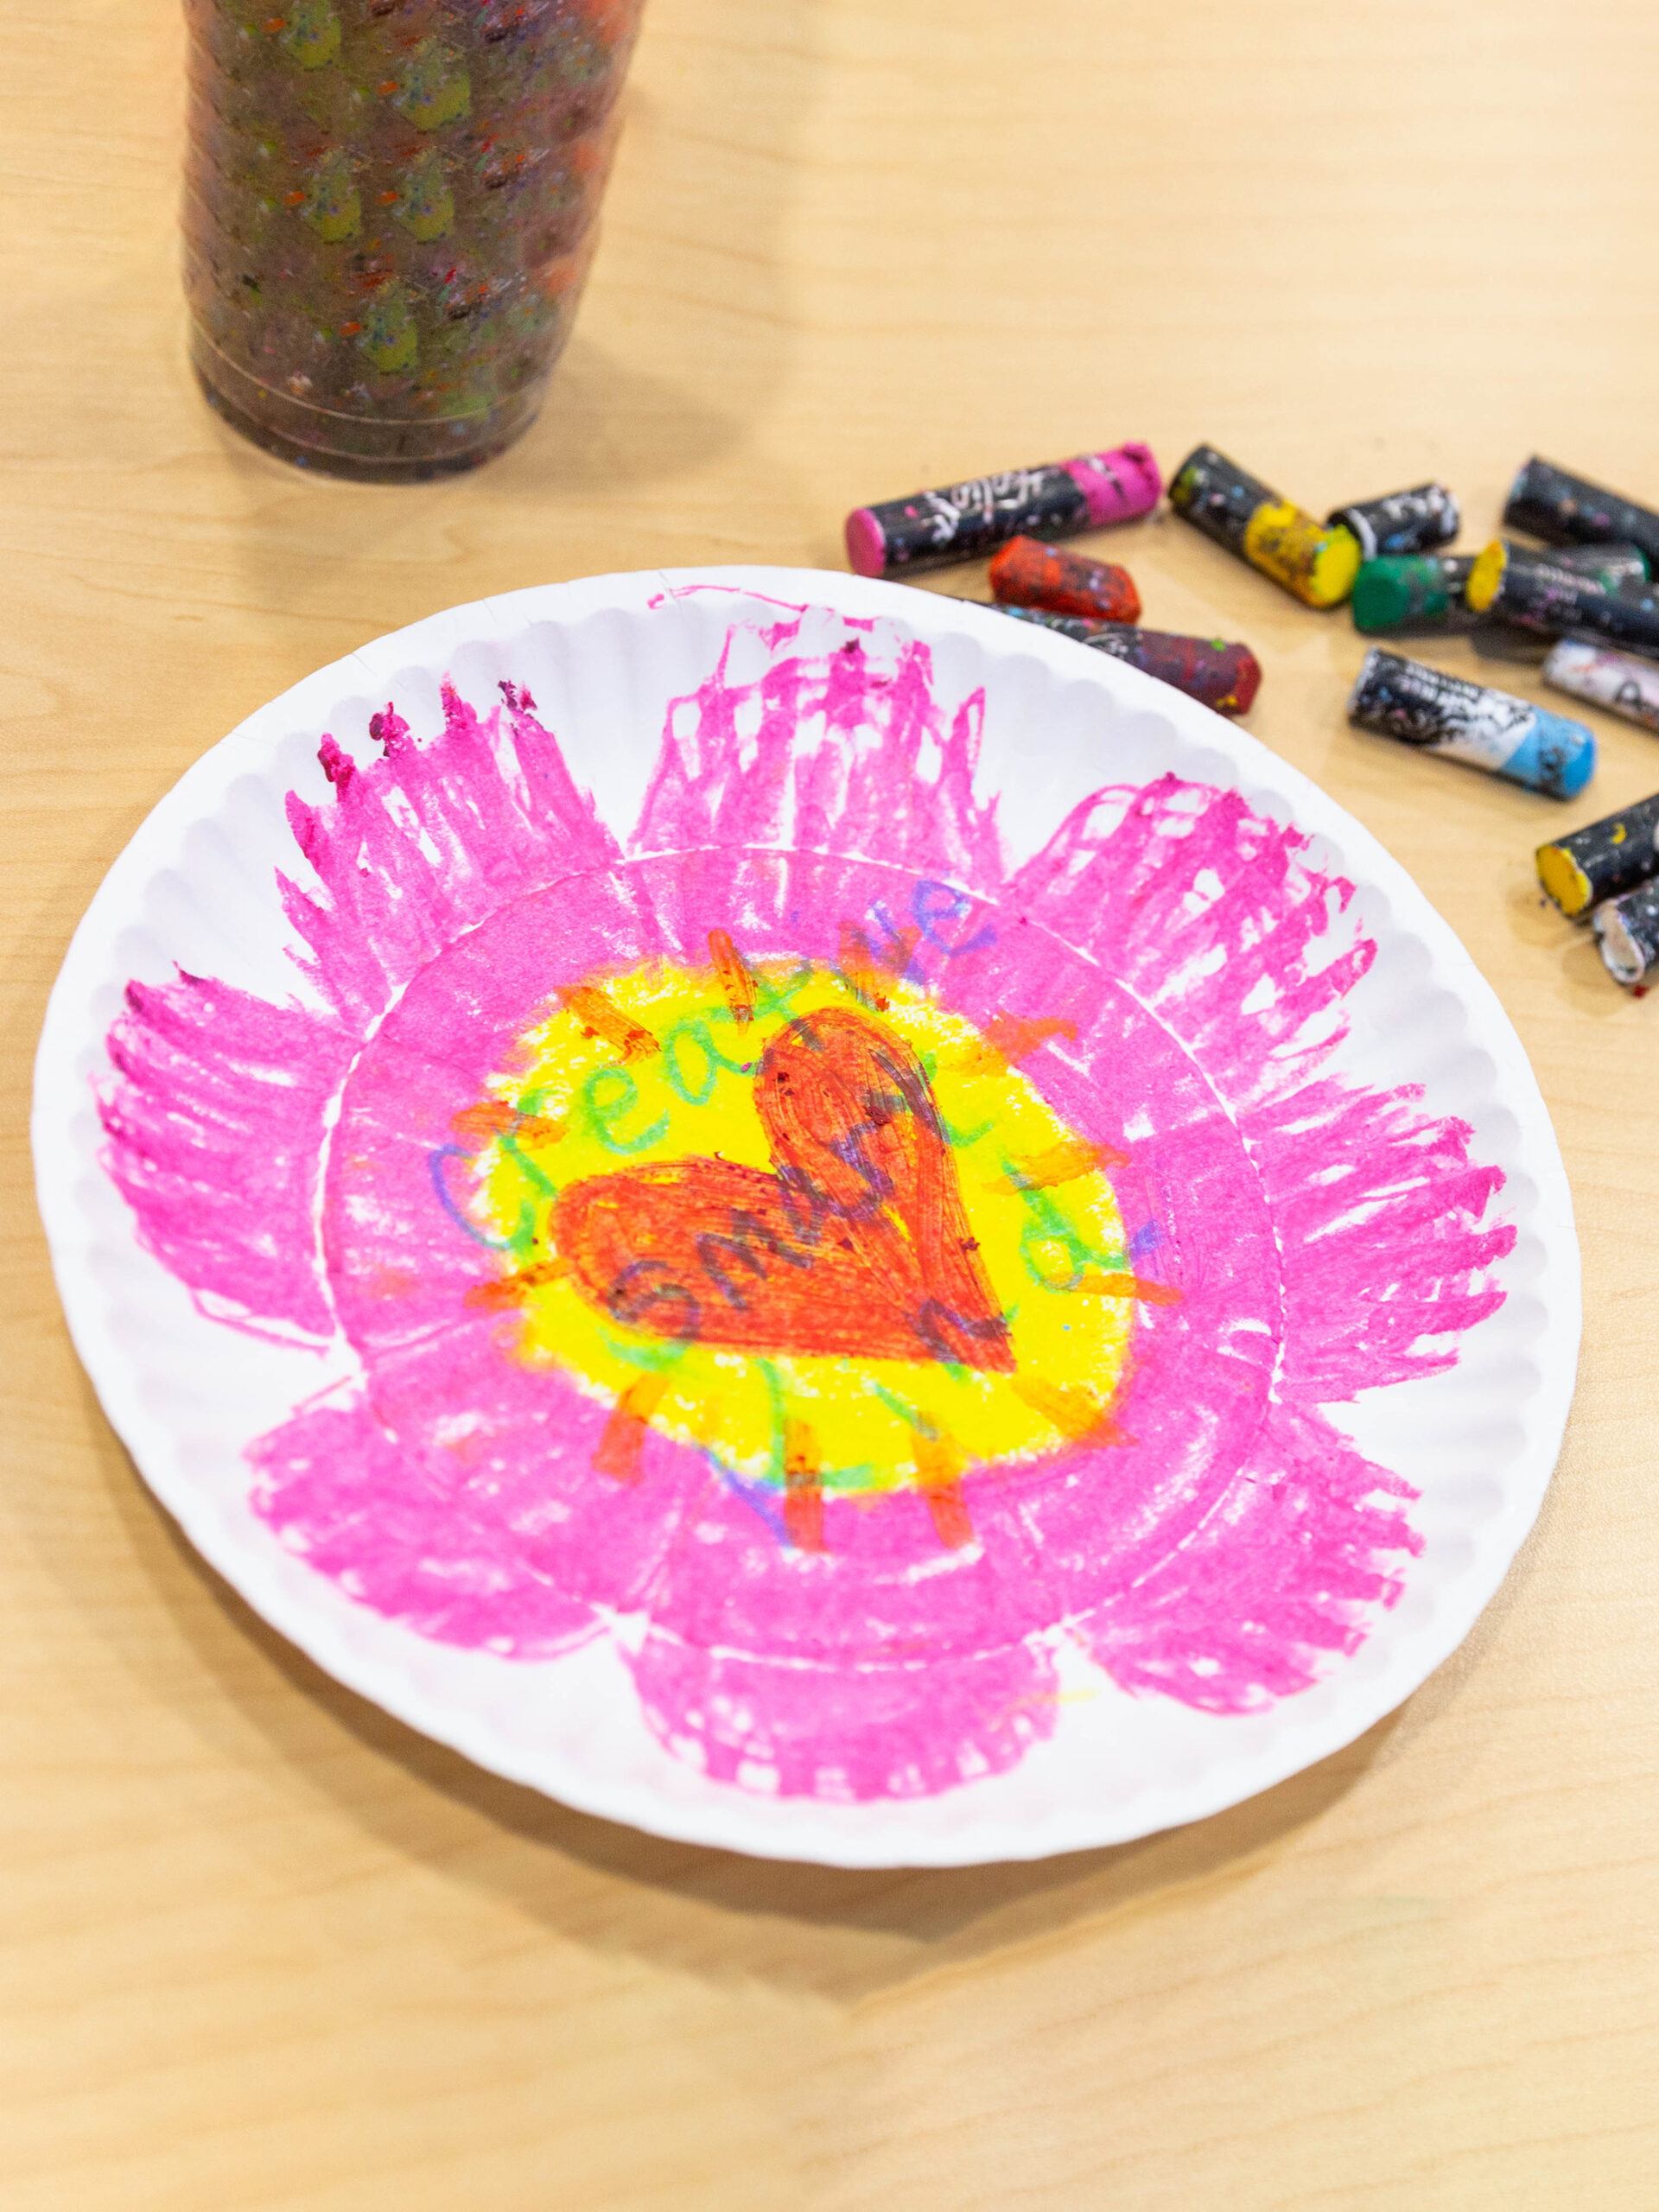 How to add art therapy practices to your child’s routine 